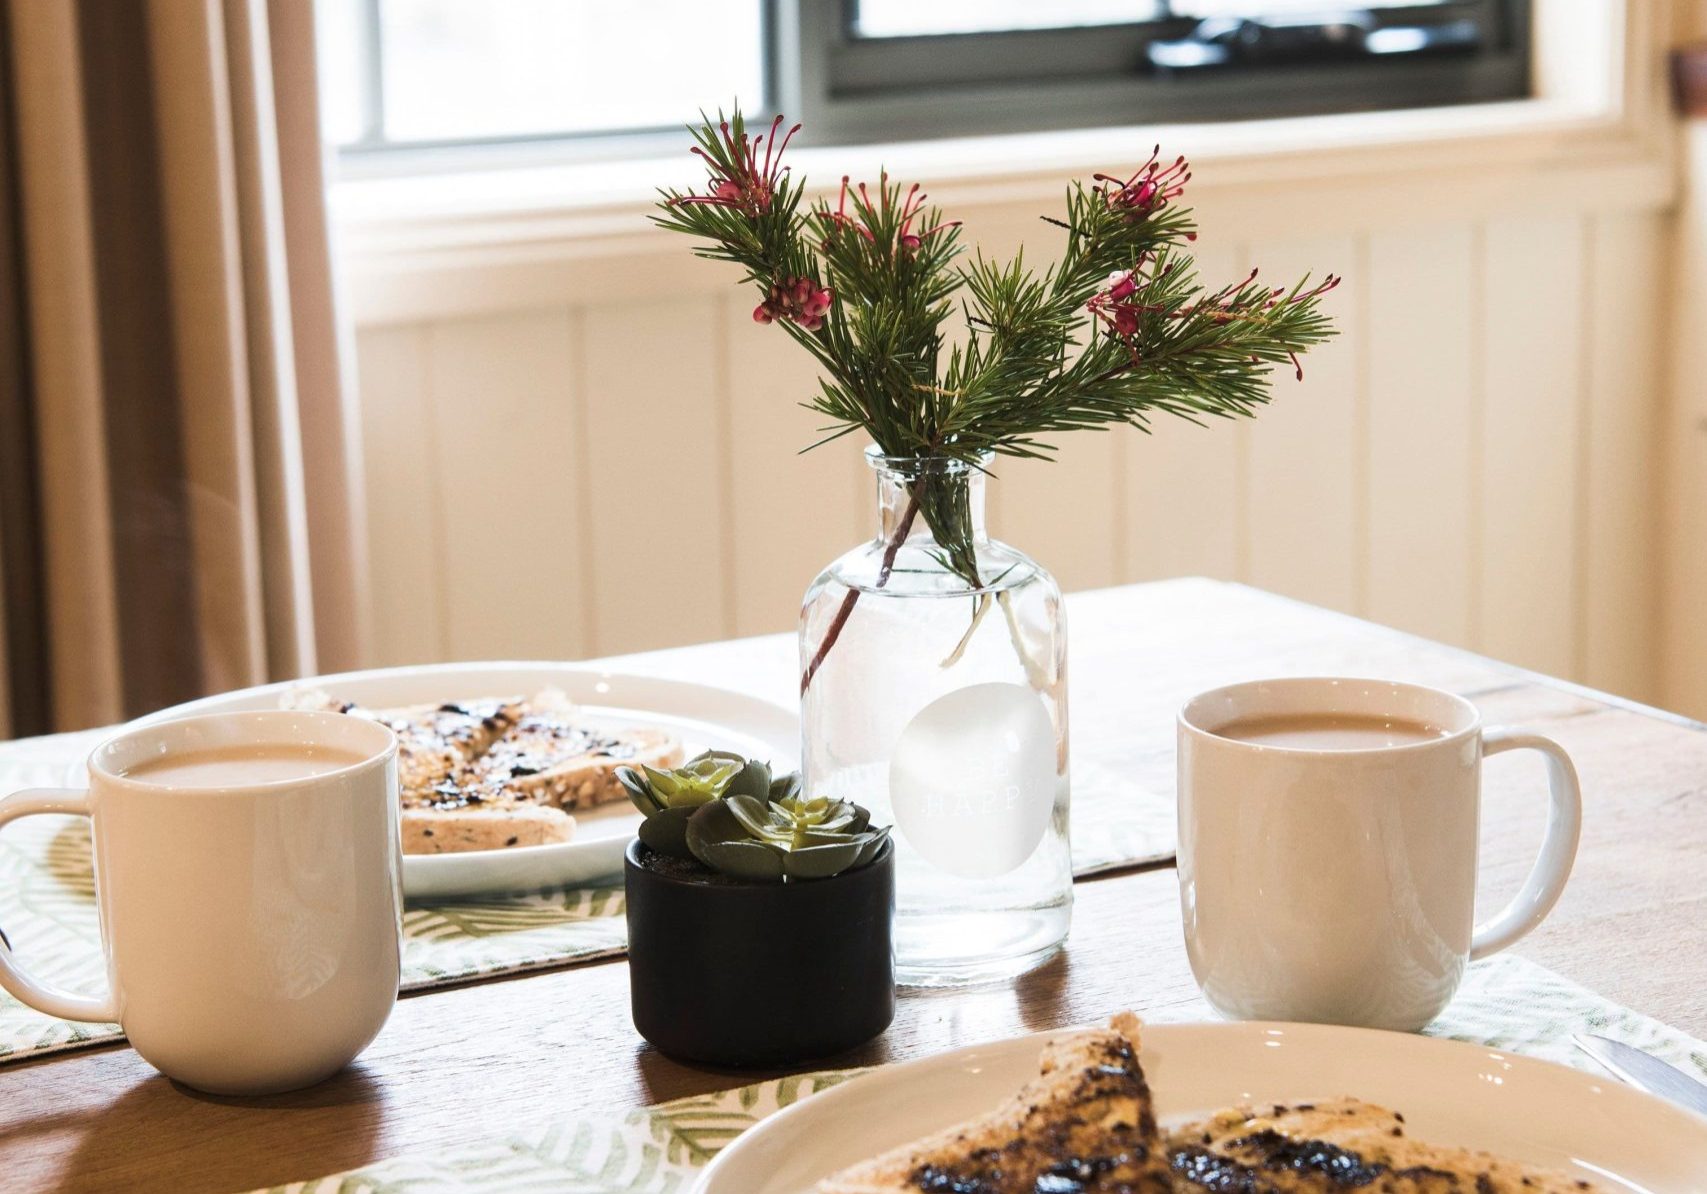 A table setting with two plates of toast topped with blueberries, two mugs, a small potted plant, and a vase with a greenery arrangement next to a window.